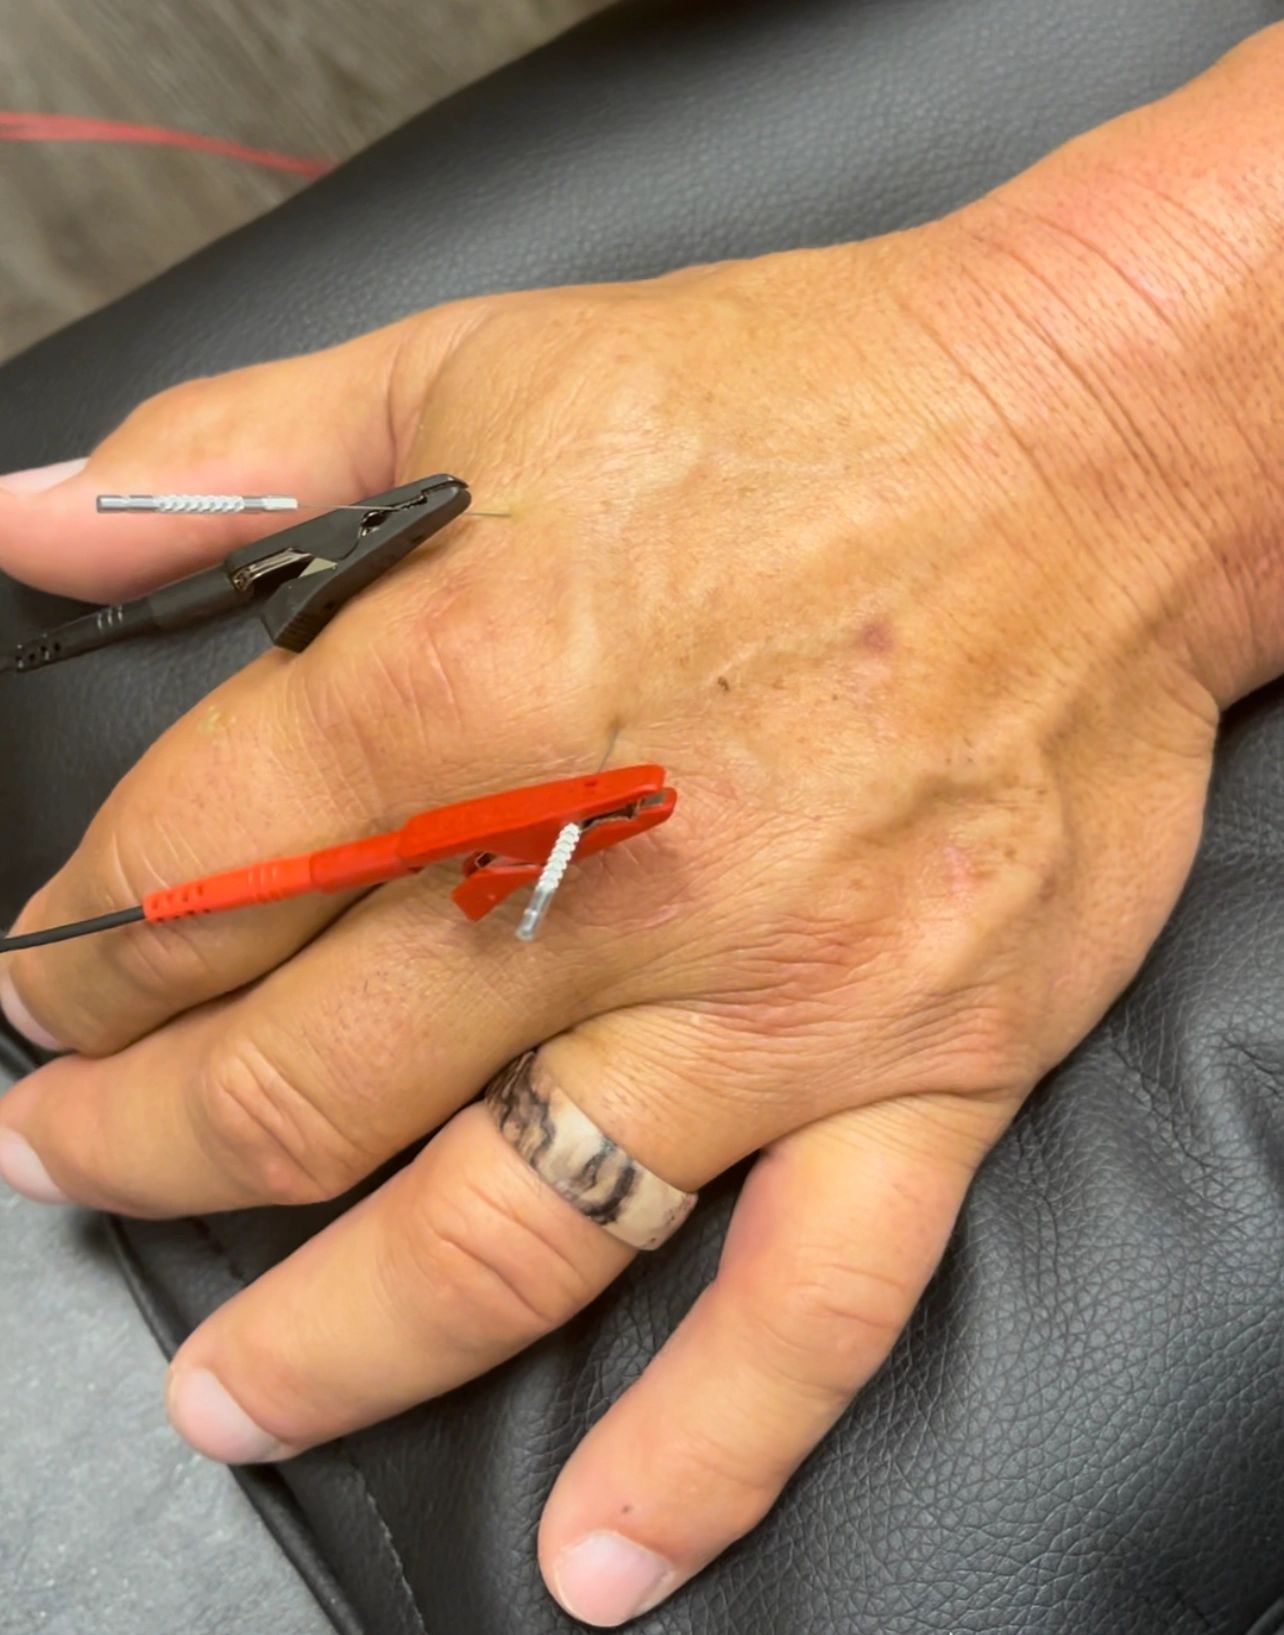 COMBINING TECHNIQUES: GRASTON AND FUNCTIONAL DRY NEEDLING +E-STIM